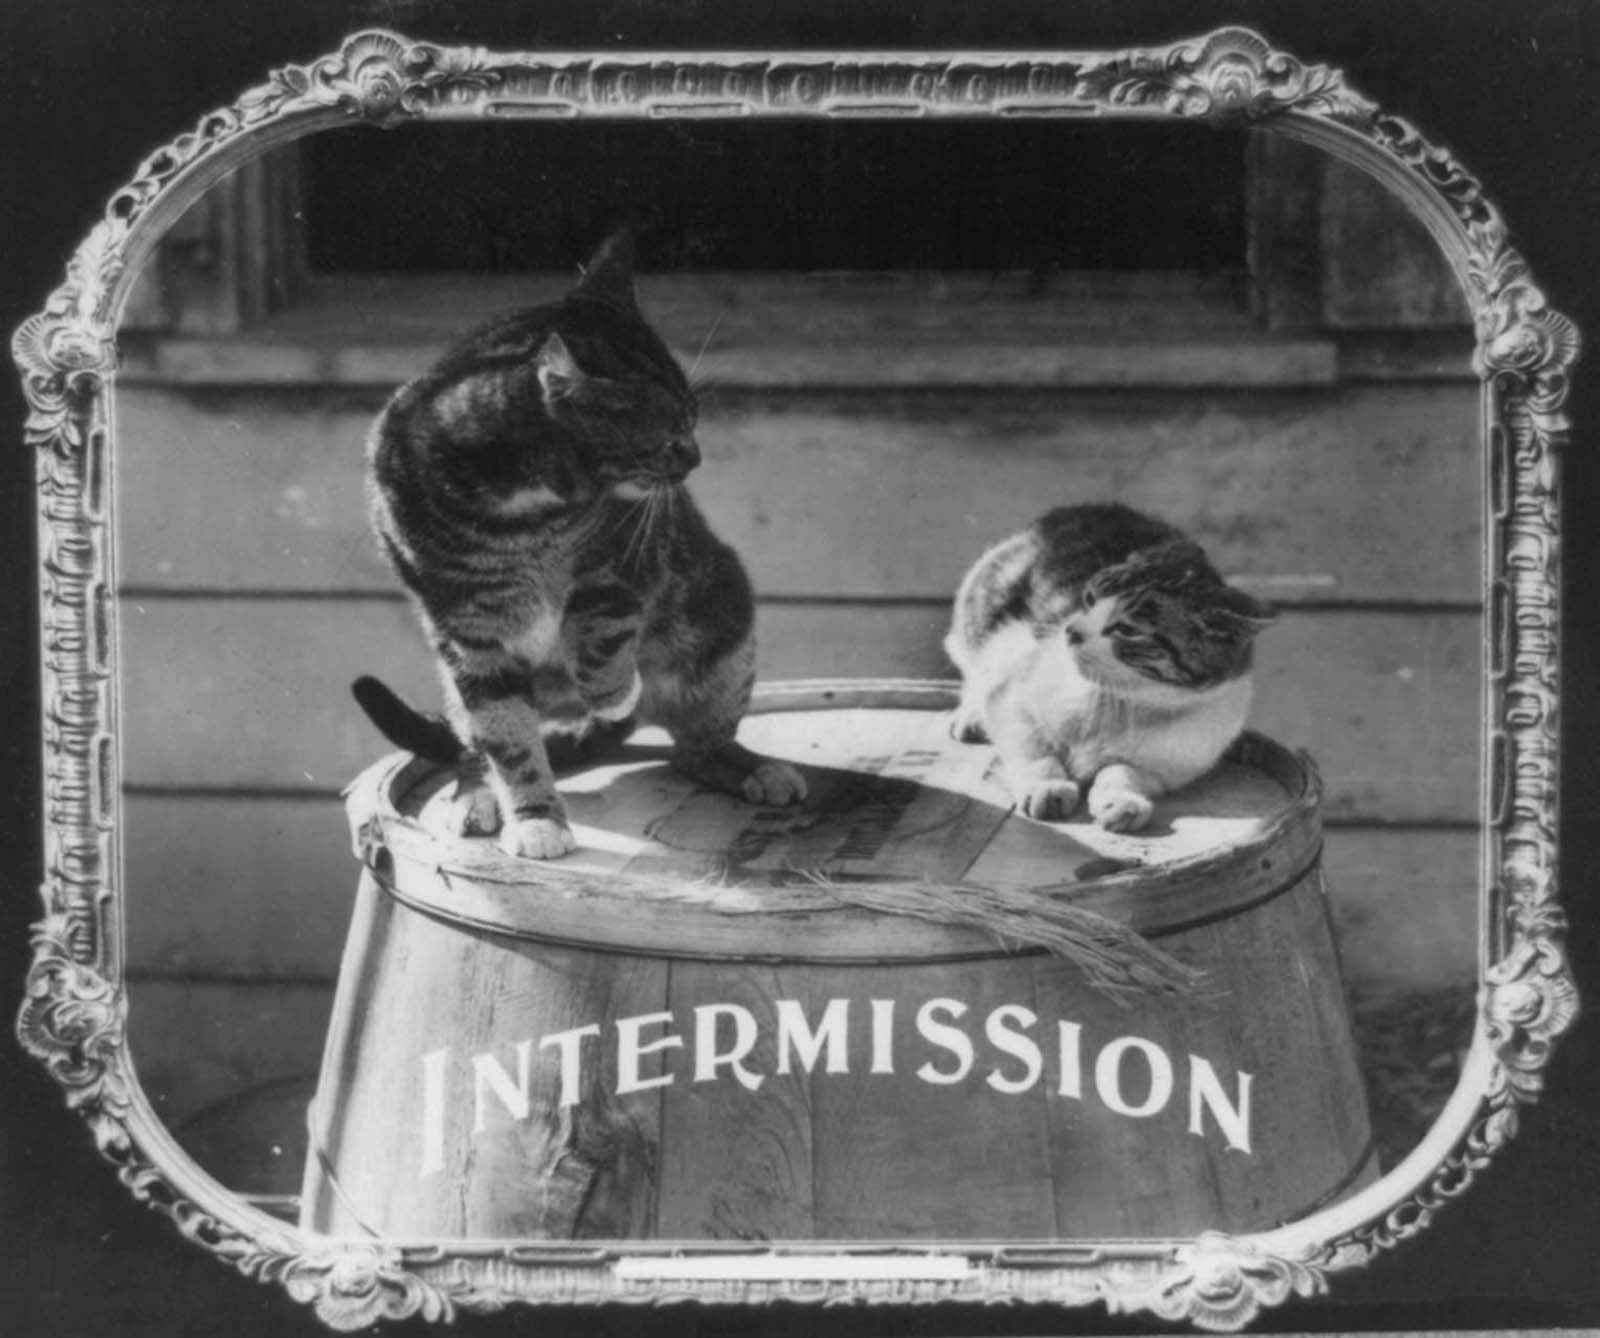 A picture of two cats relaxing on a wooden barrel was used to announce the ‘intermission’.